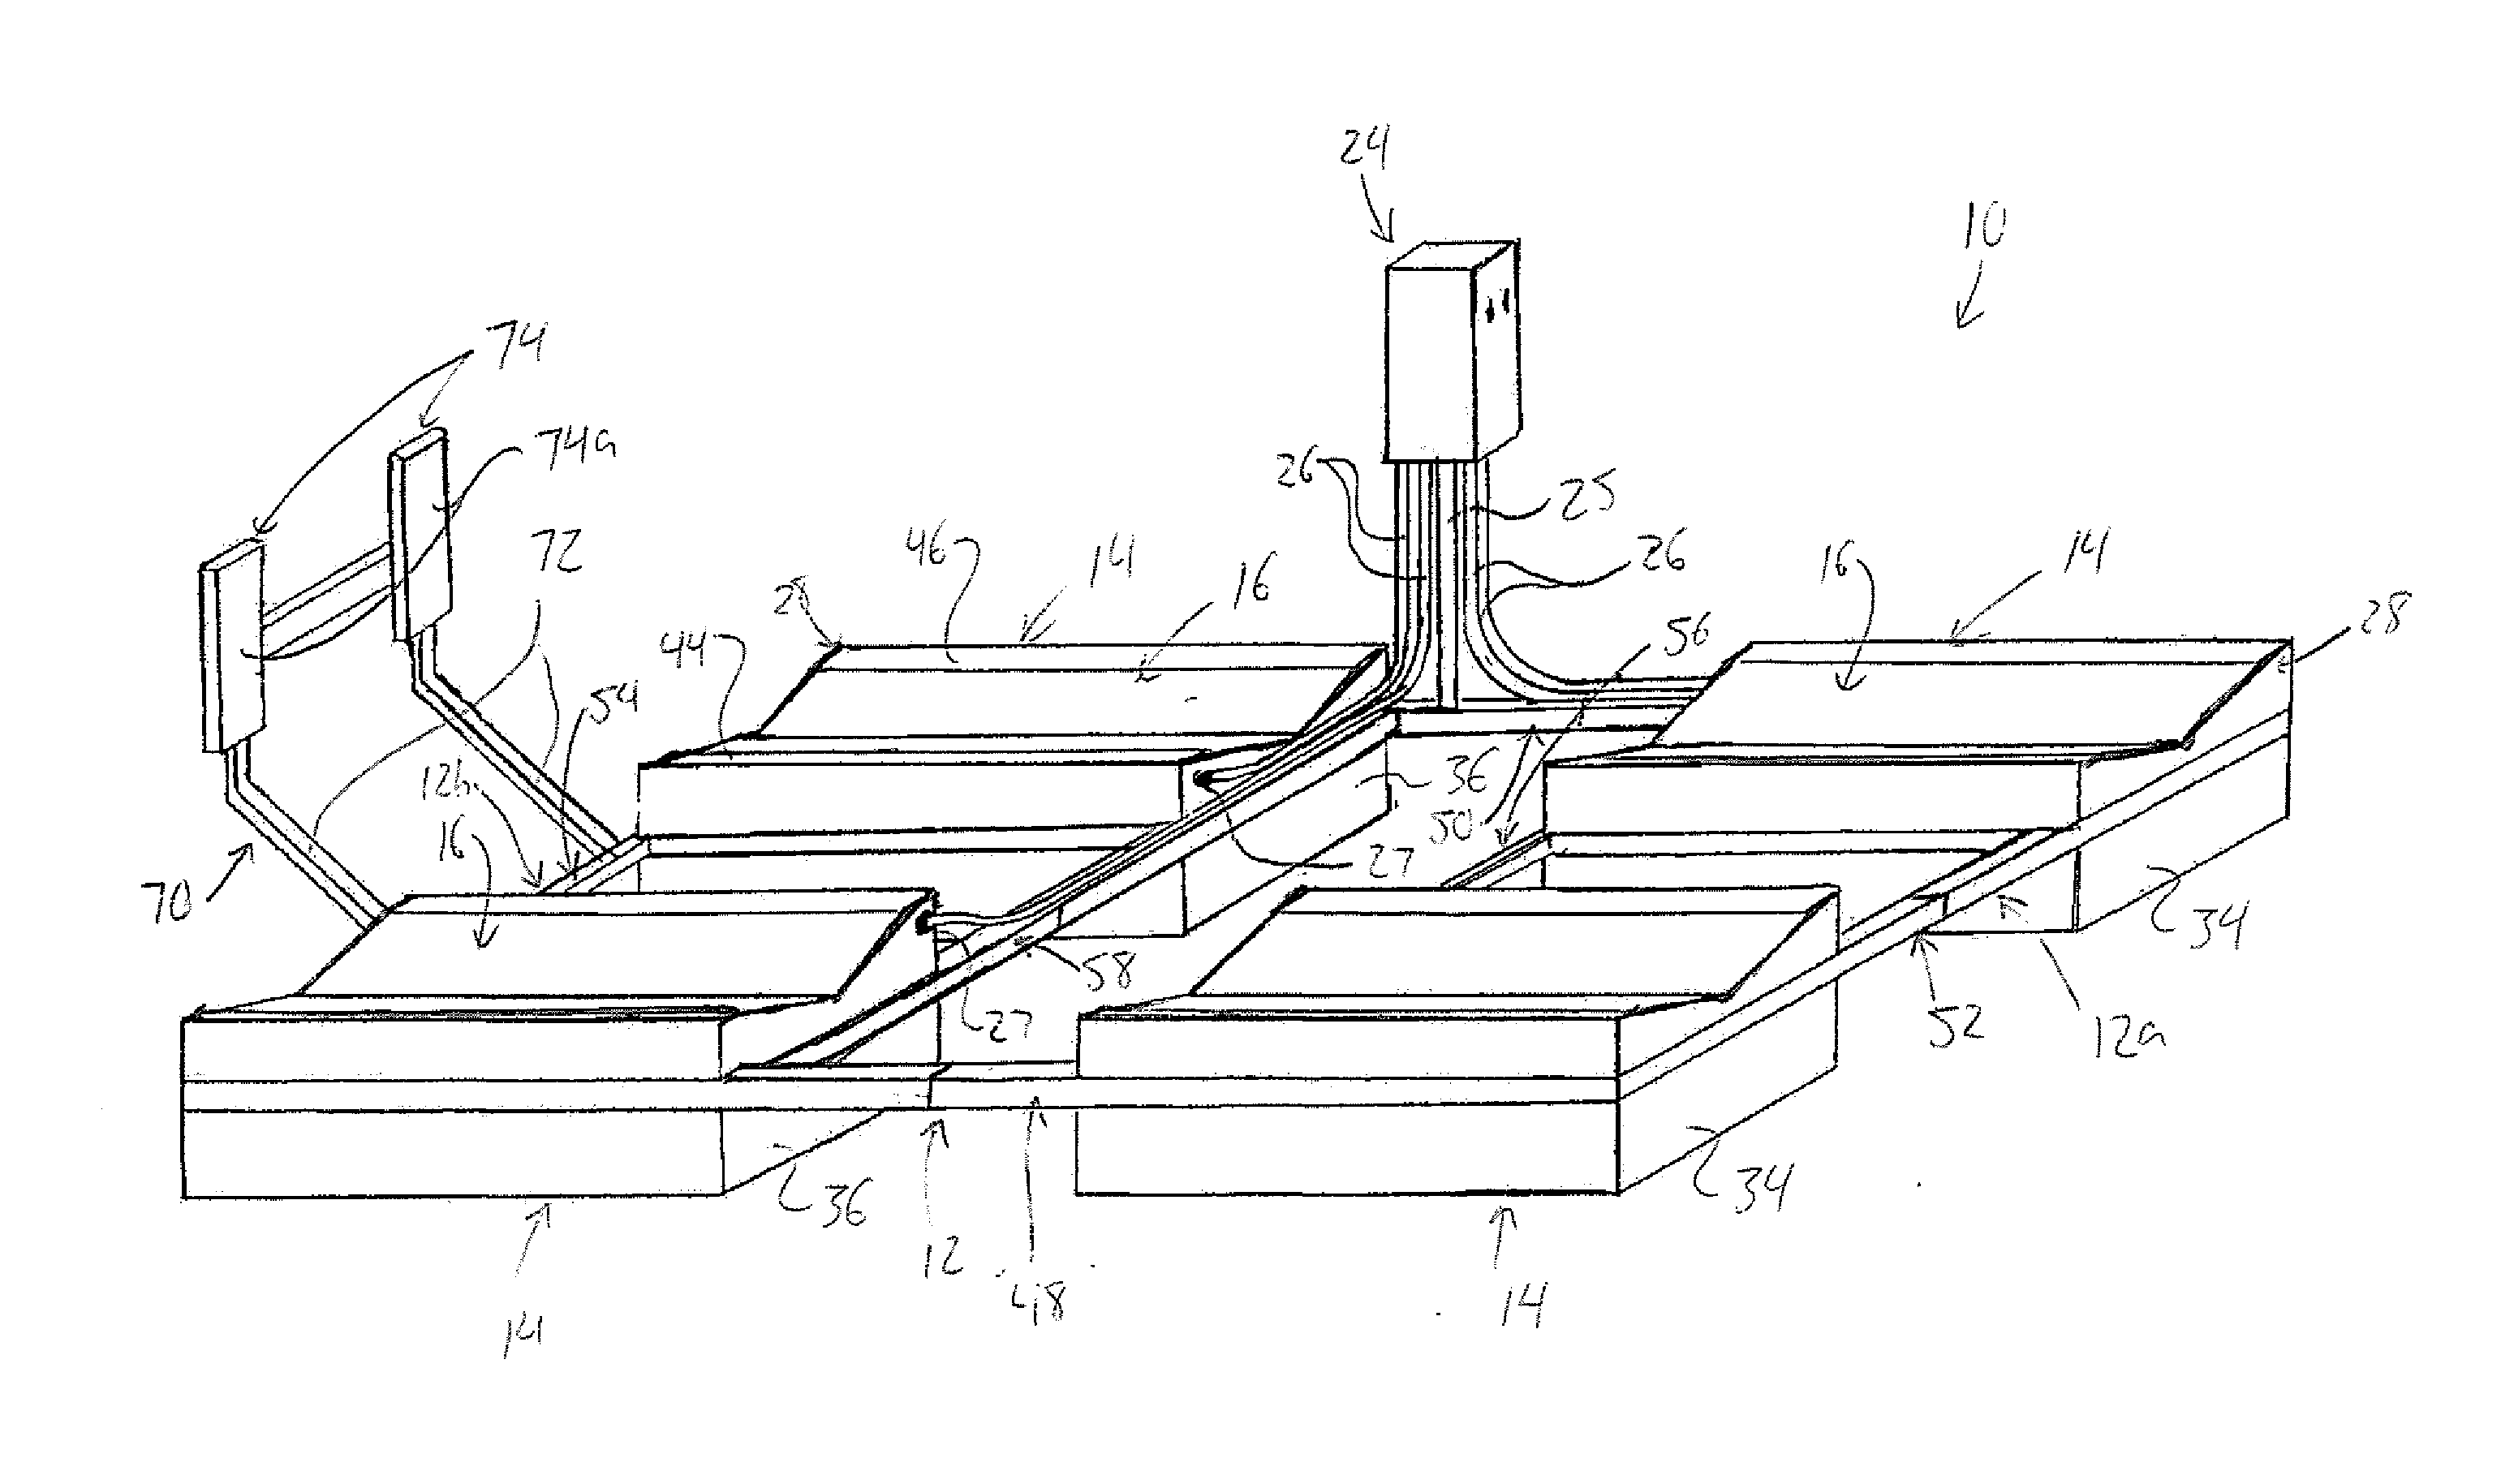 Pneumatic Boat Lift with Boat-Carrying and Boat-Guiding Air Tanks